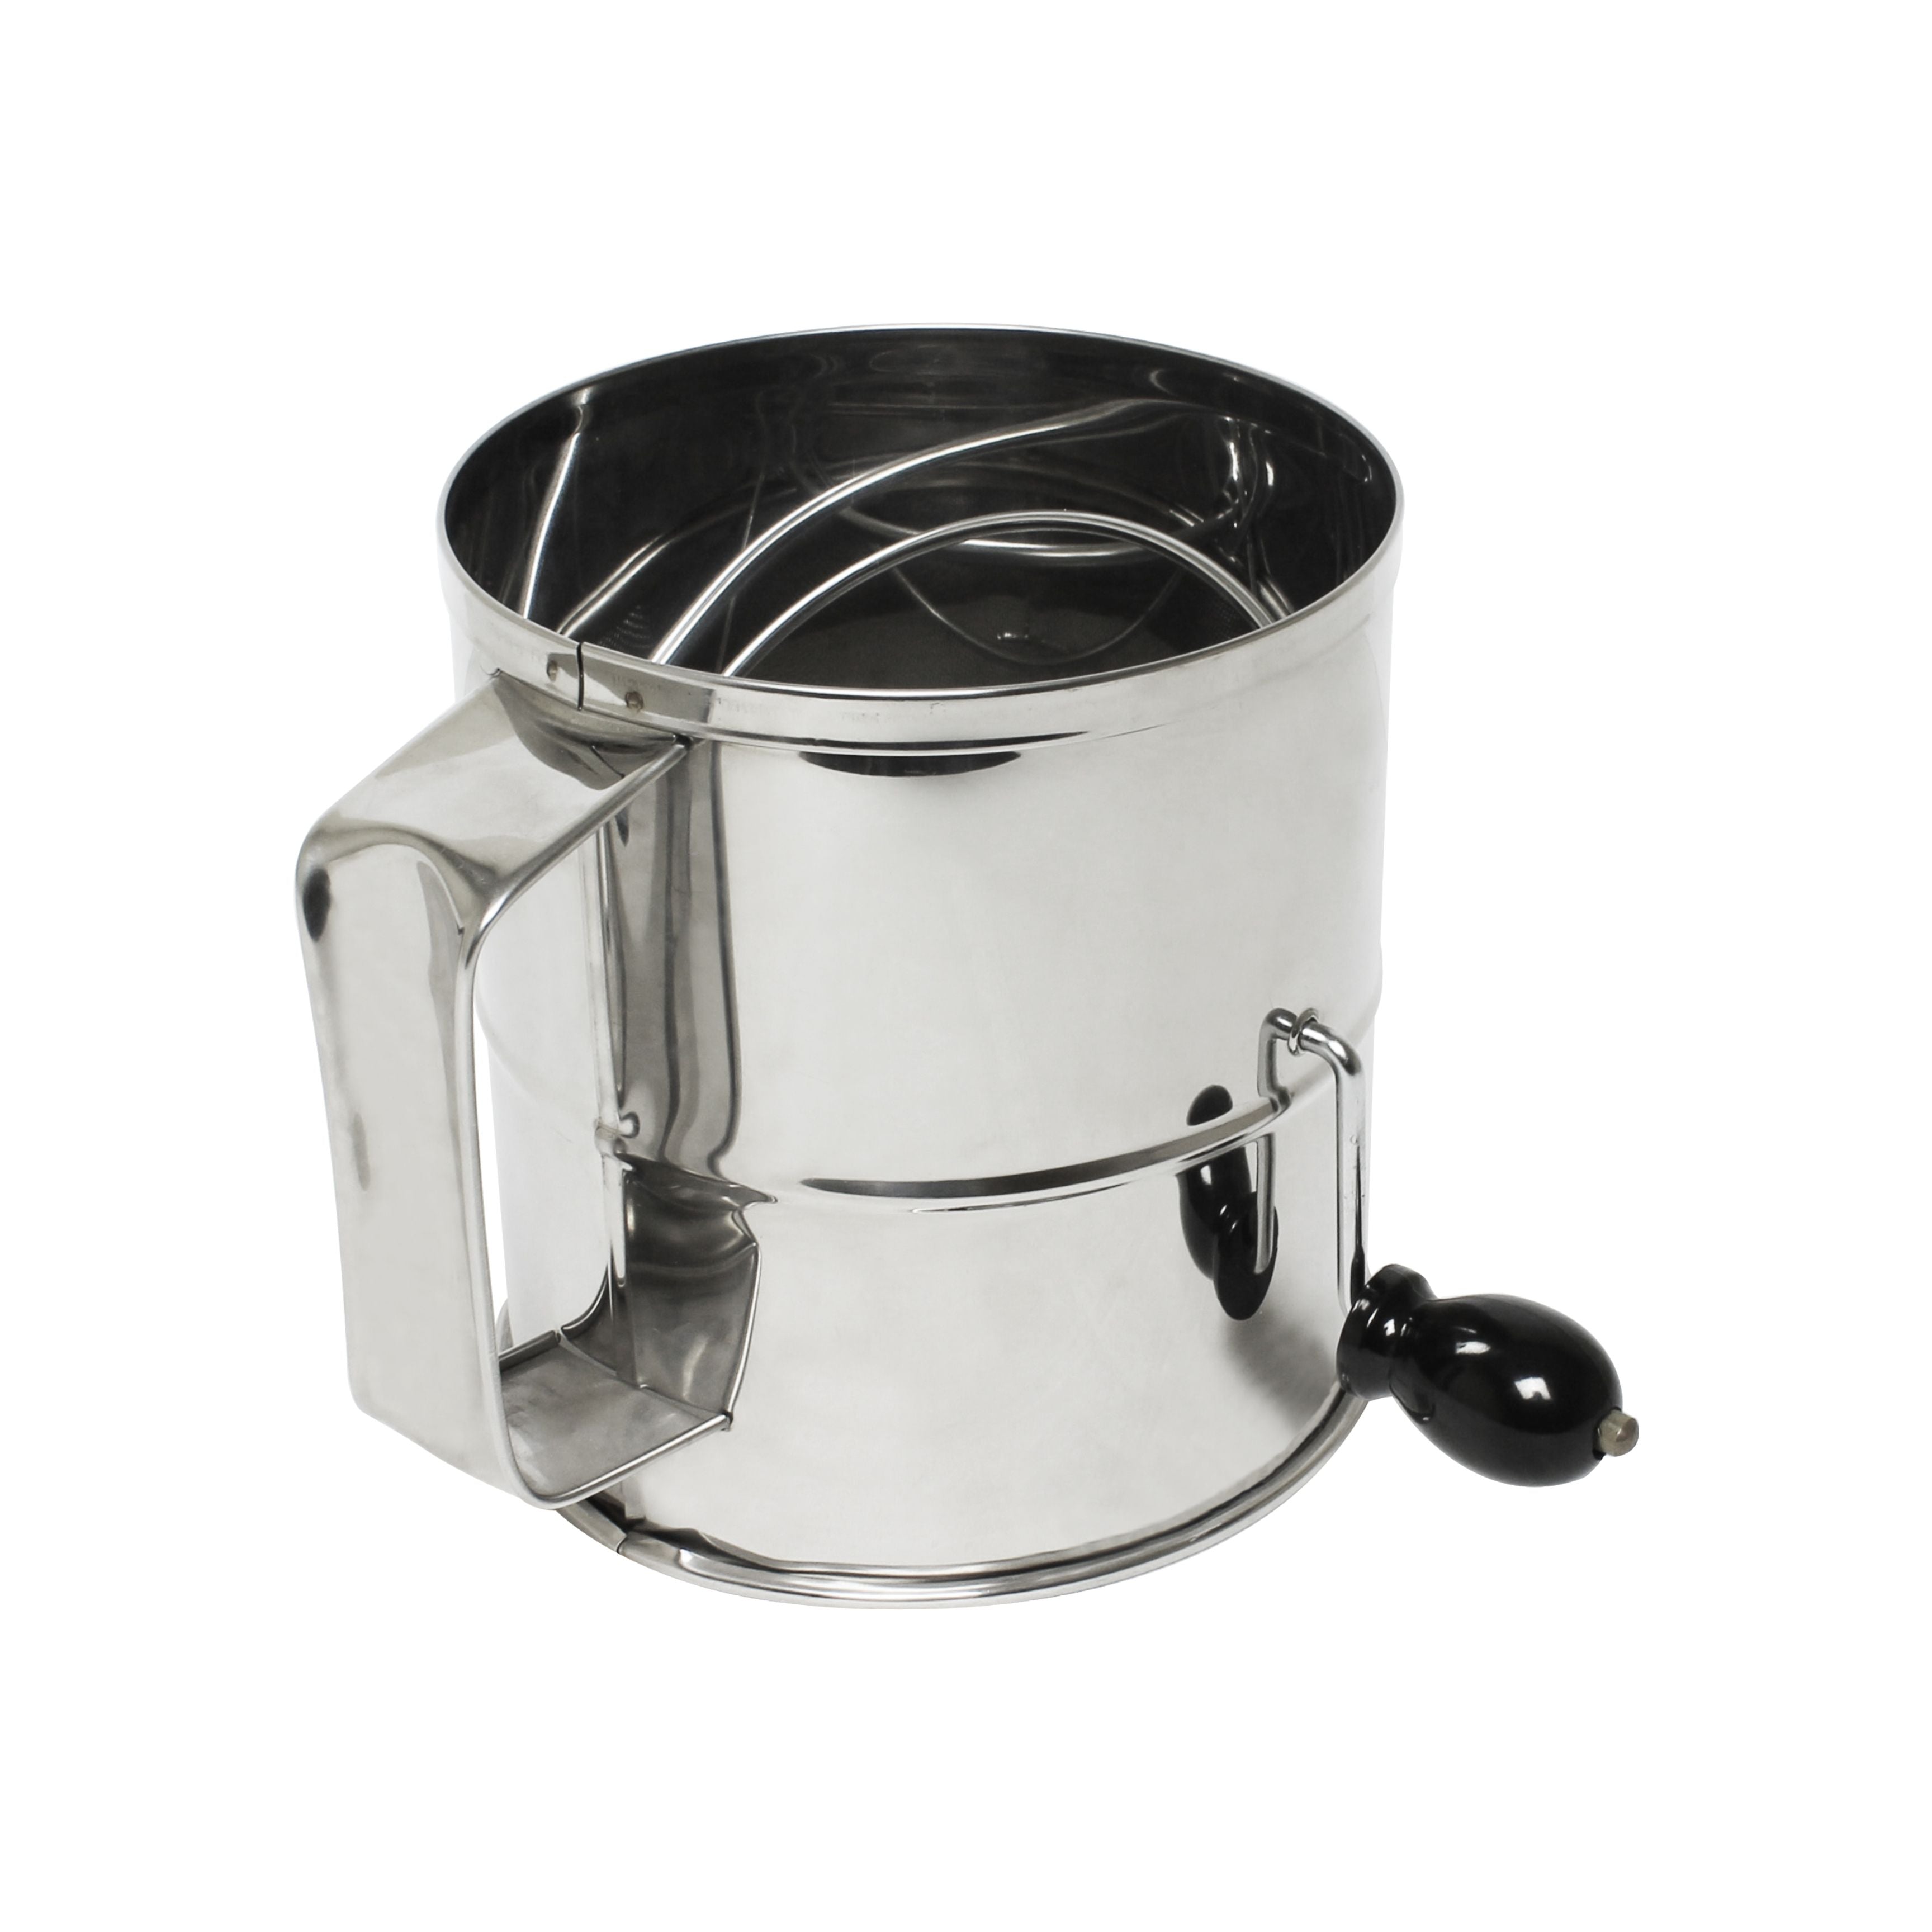 Thunder Group SLFS008 8-Cup Stainless Steel Flour Sifter